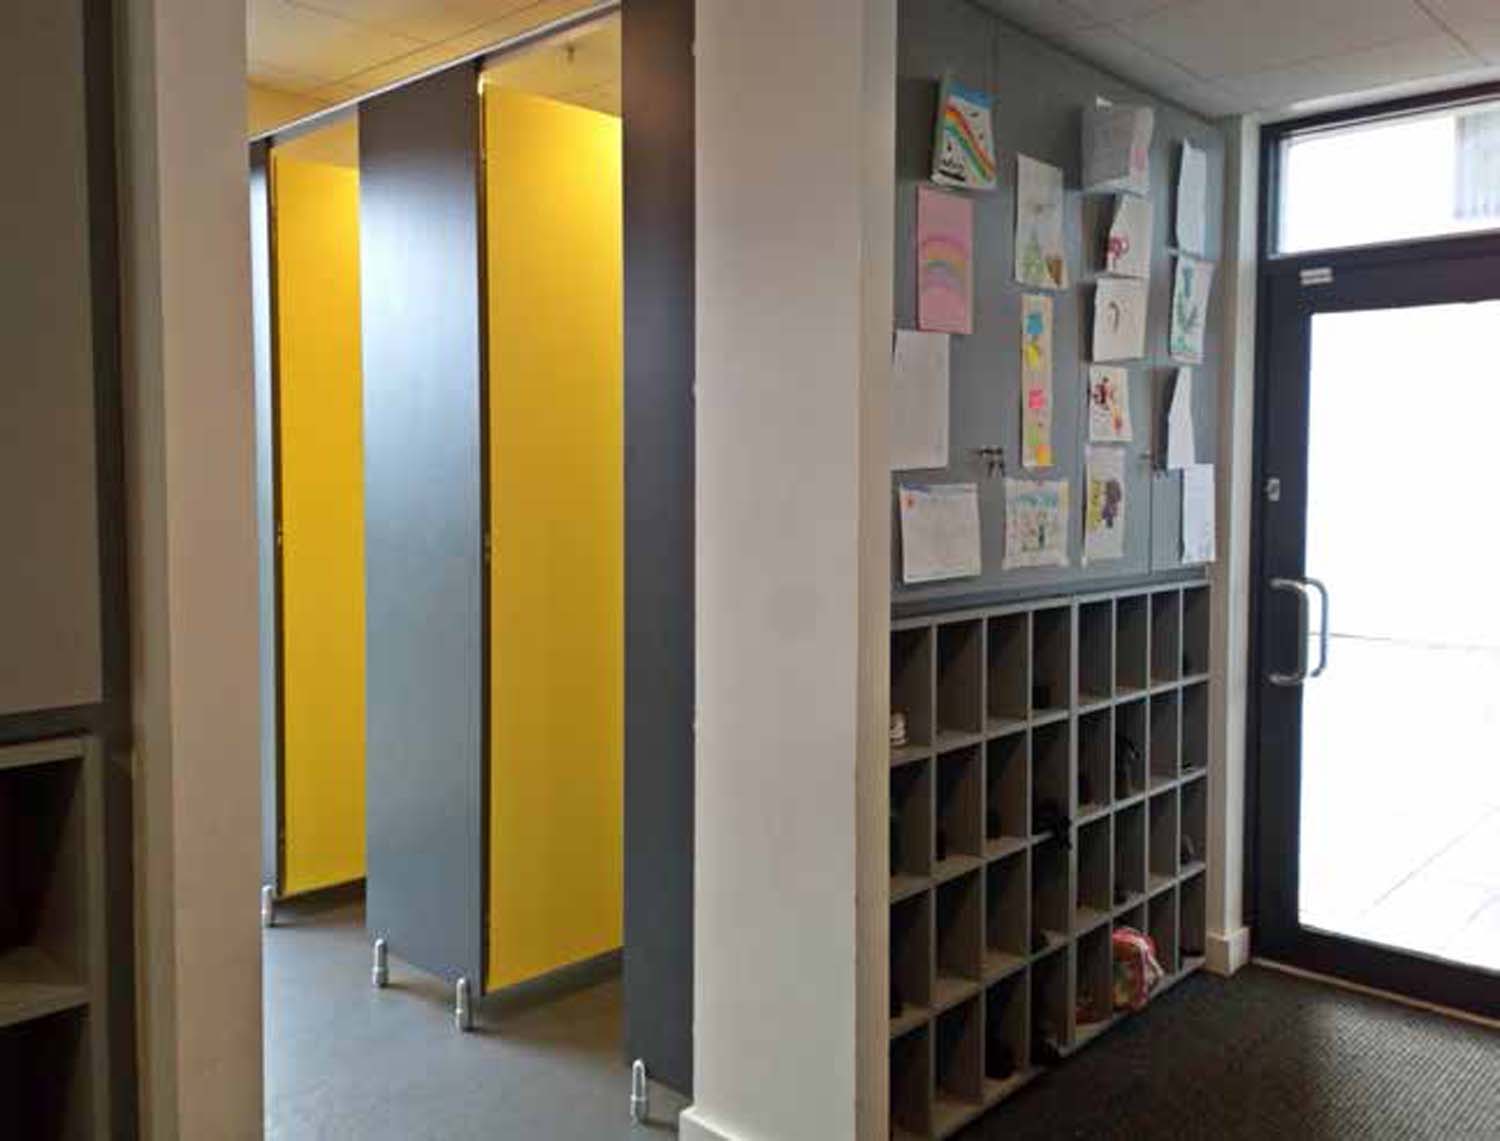 Toilet facilities with yellow cubicles next to shoes storage space and a building entrance.